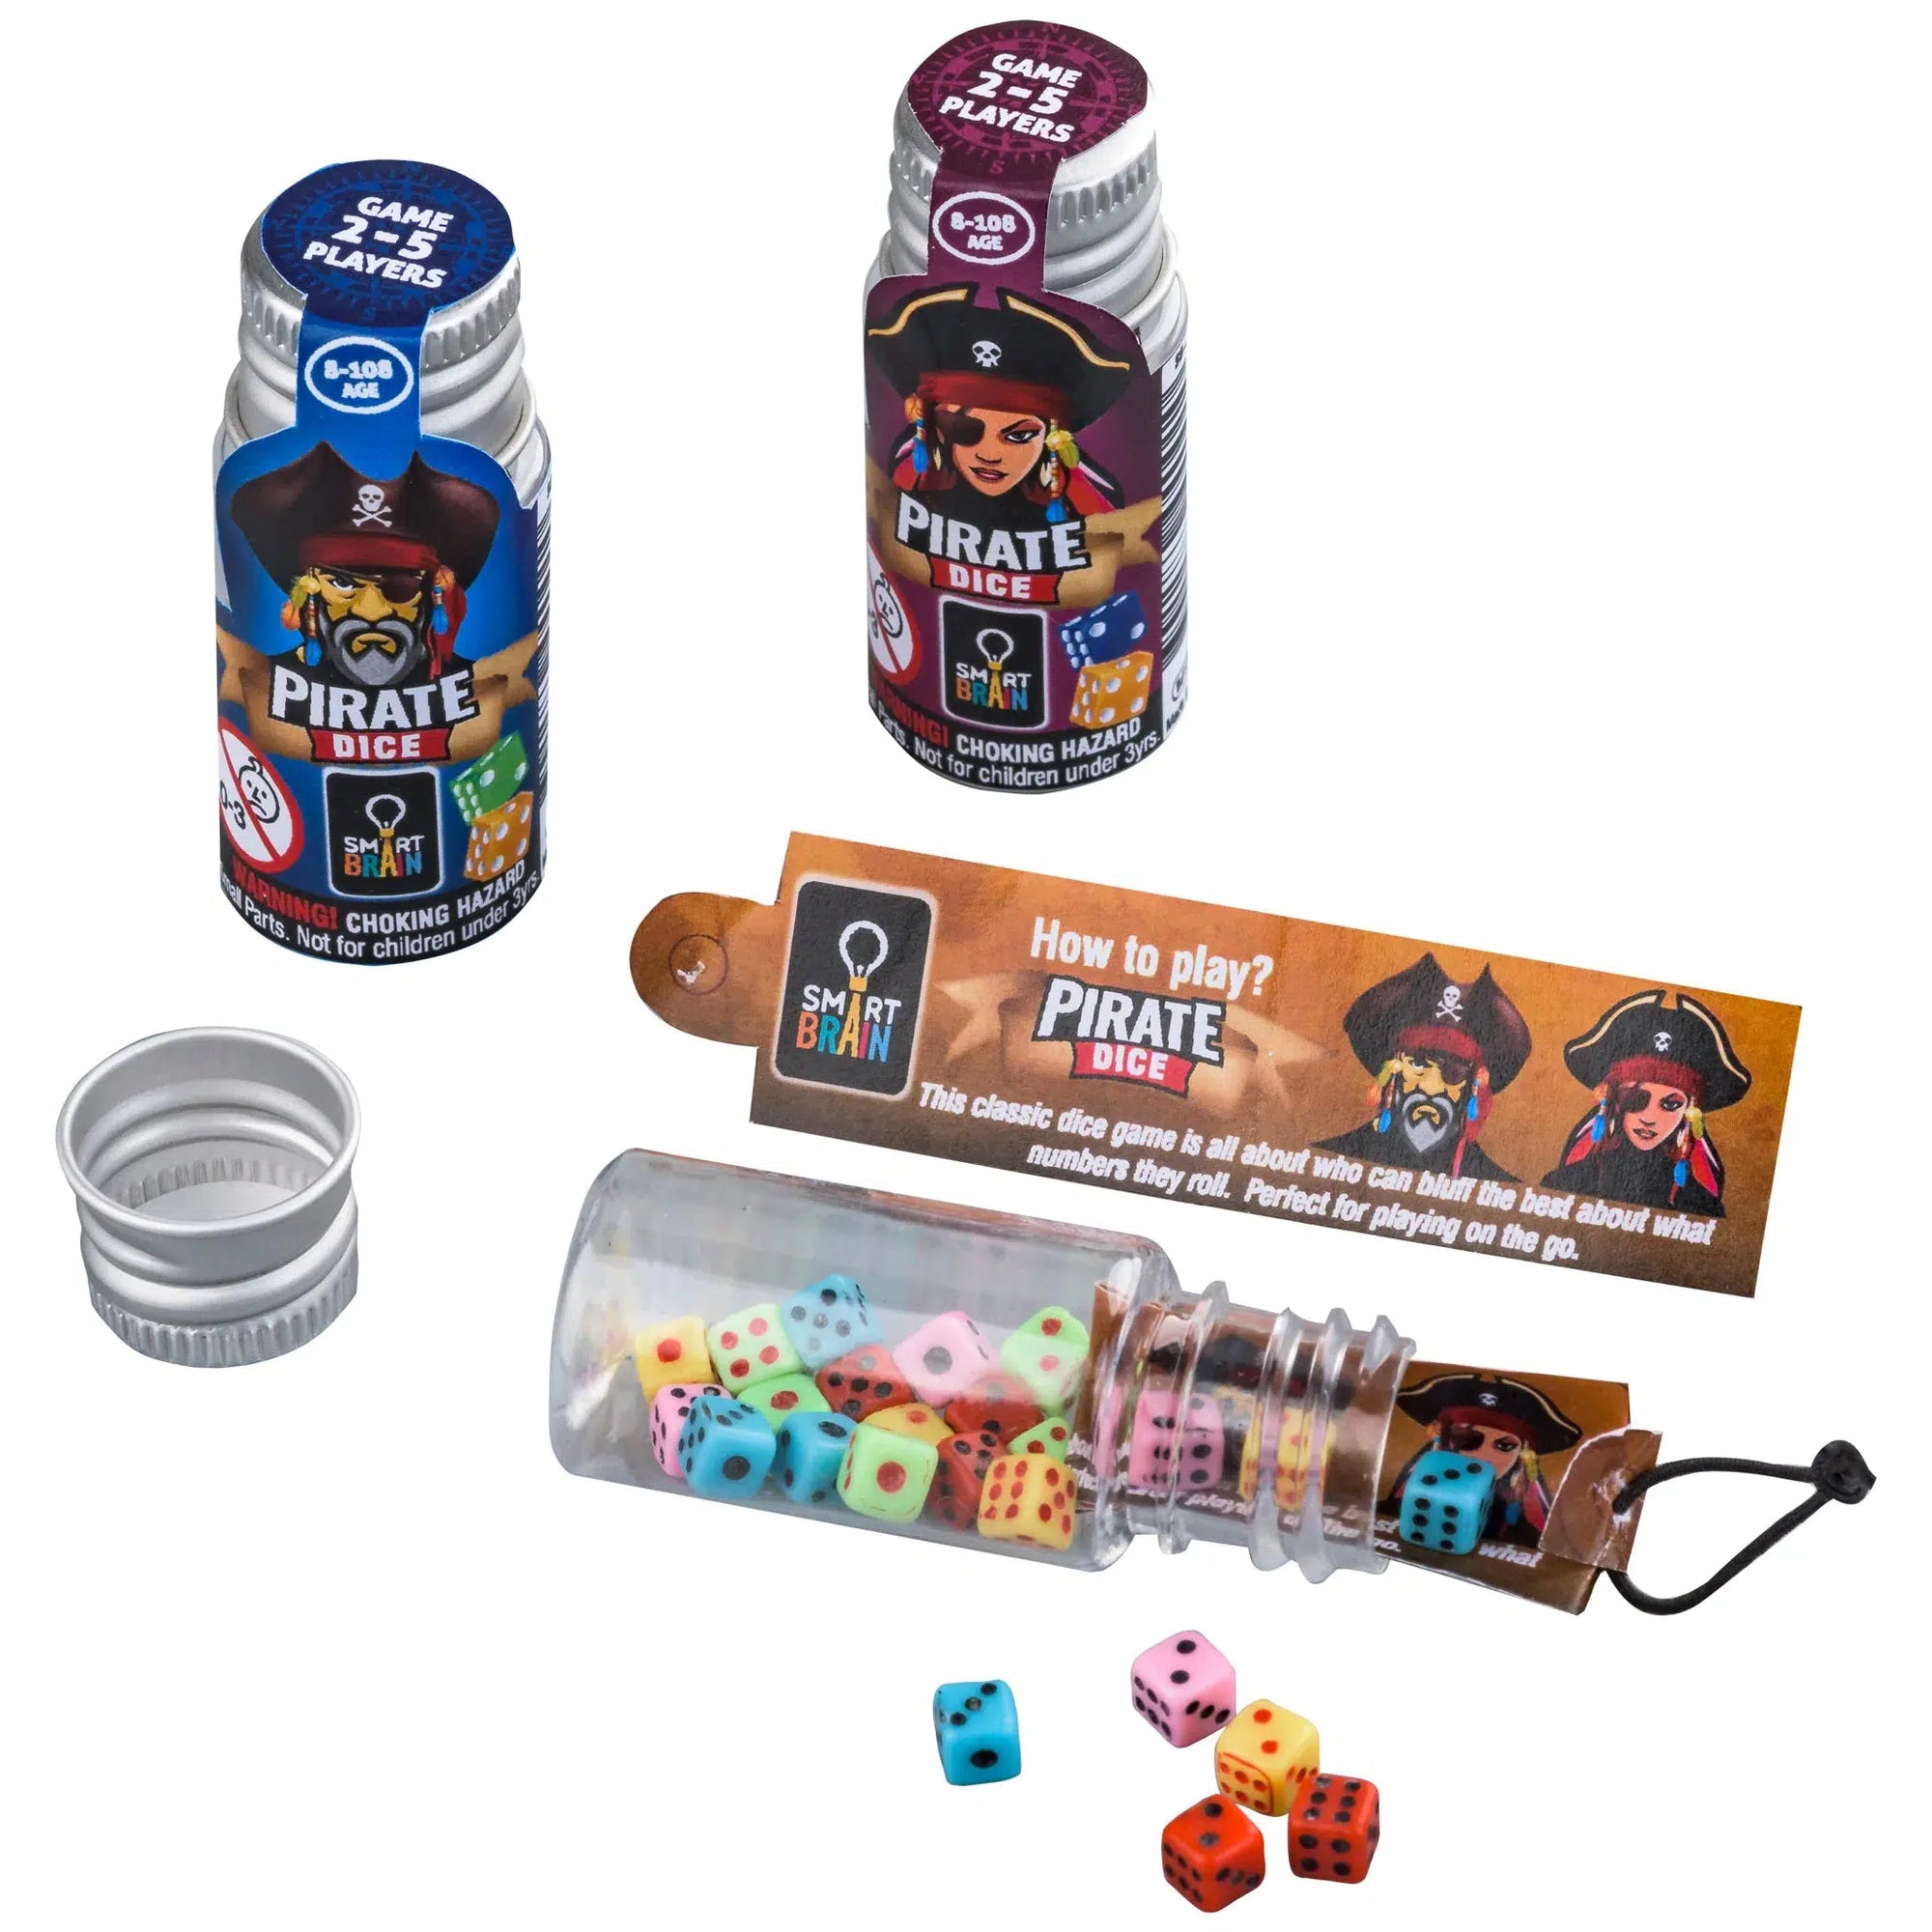 Front view of the red and blue Pirate Dice Bottle Game with one bottle laying on its side and open showing dice and instructions.